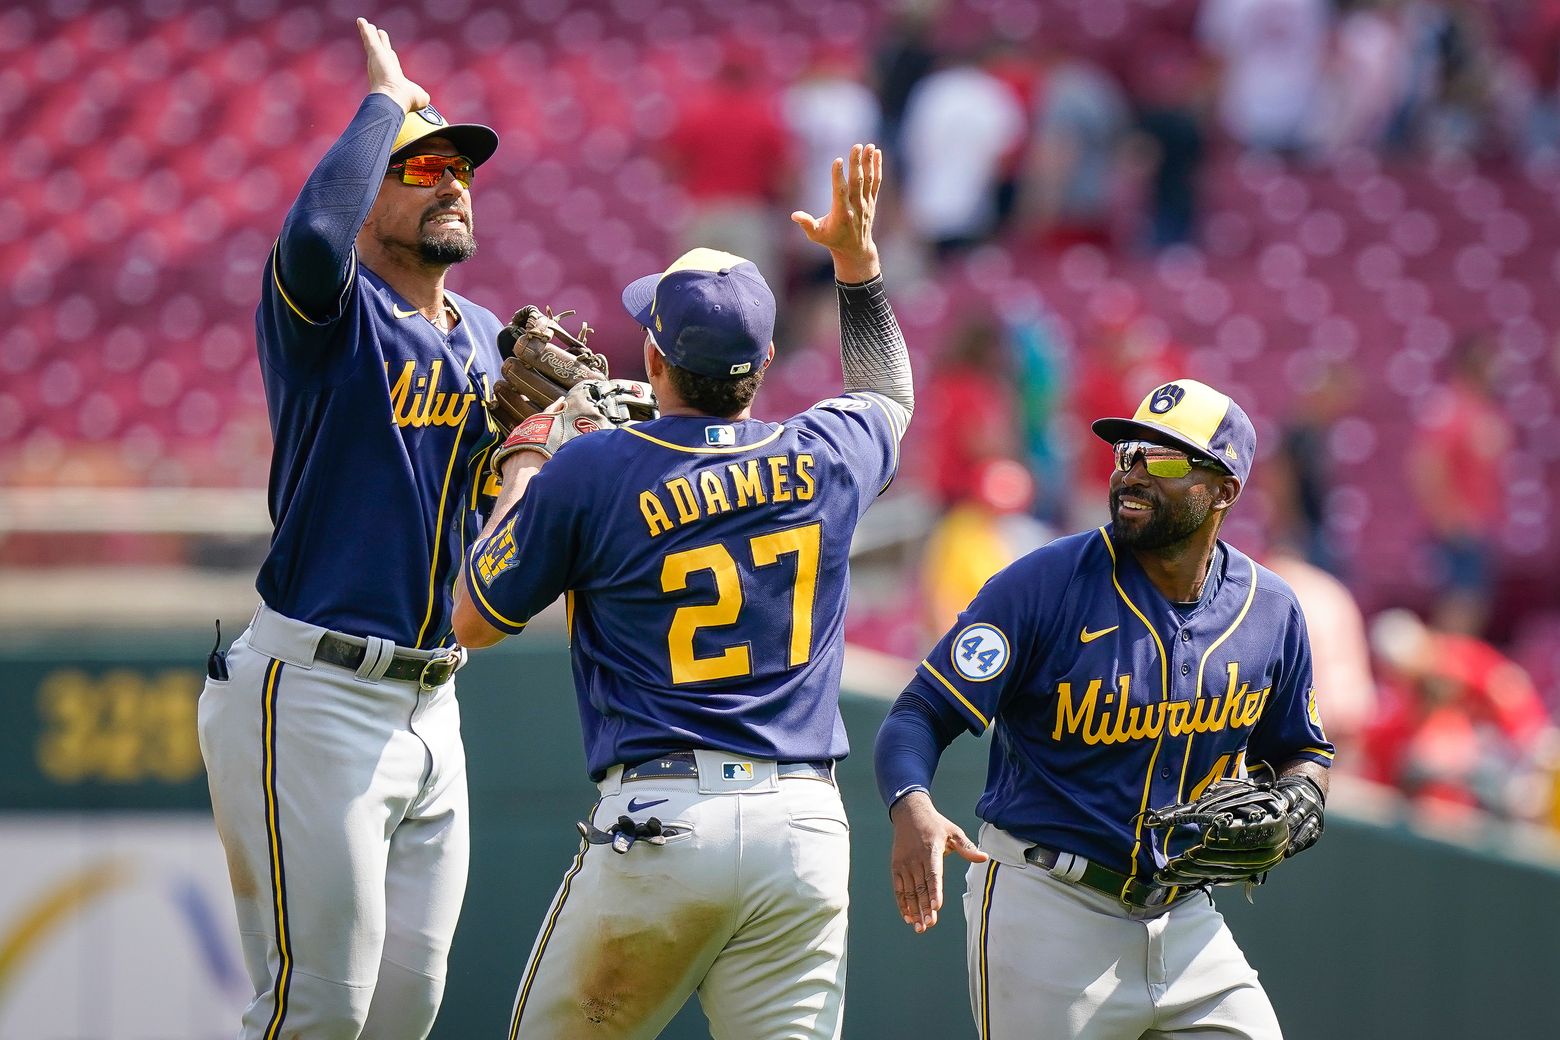 Brewers: Willy Adames Wins NL Player of the Week